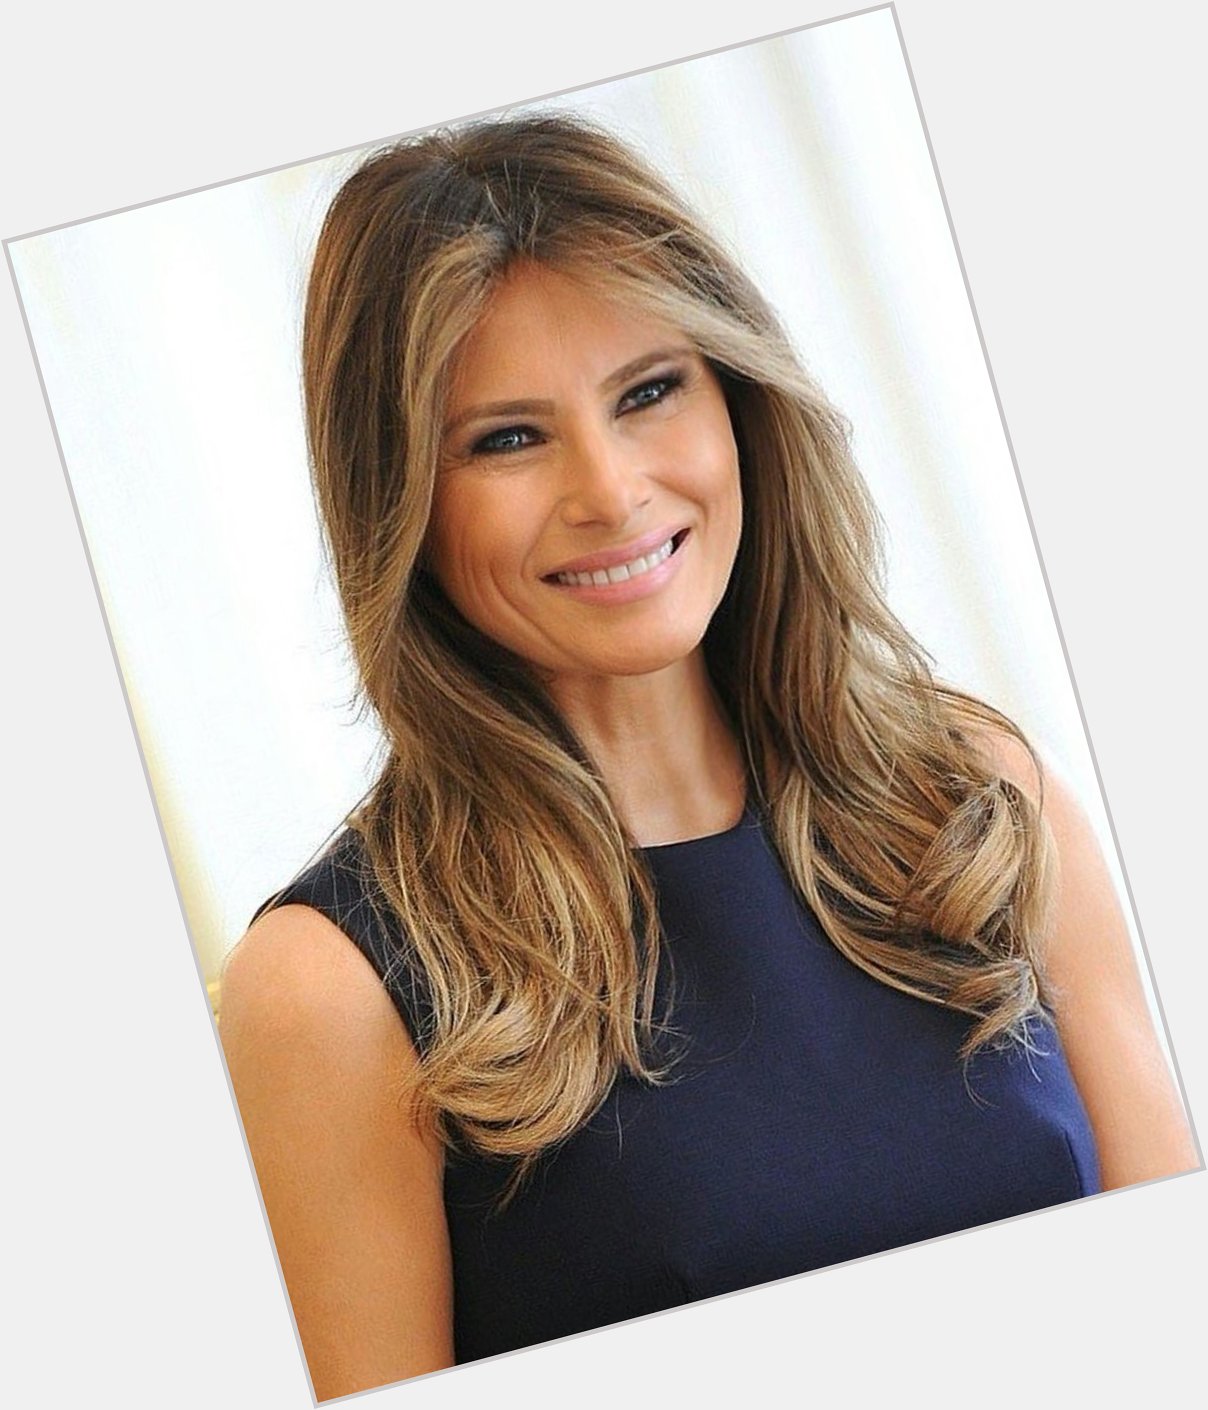 Happy Birthday Blessings to our kind & beautiful First Lady, Melania Trump. 